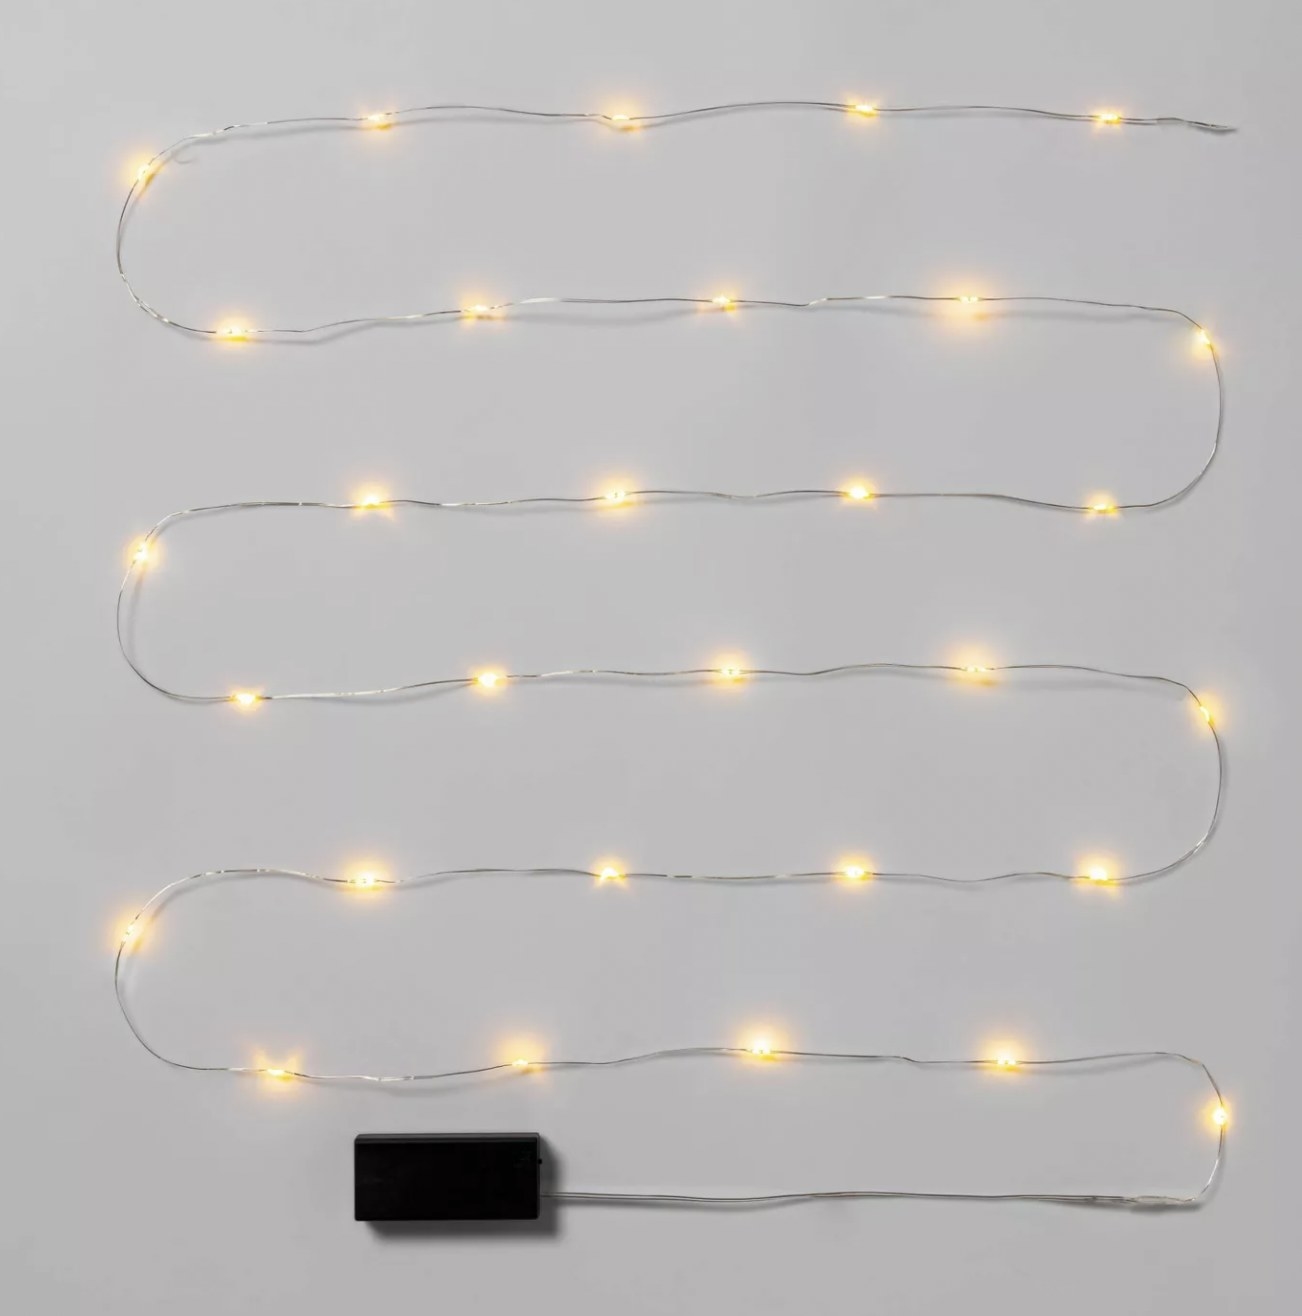 The string of warm white lights on silver wire